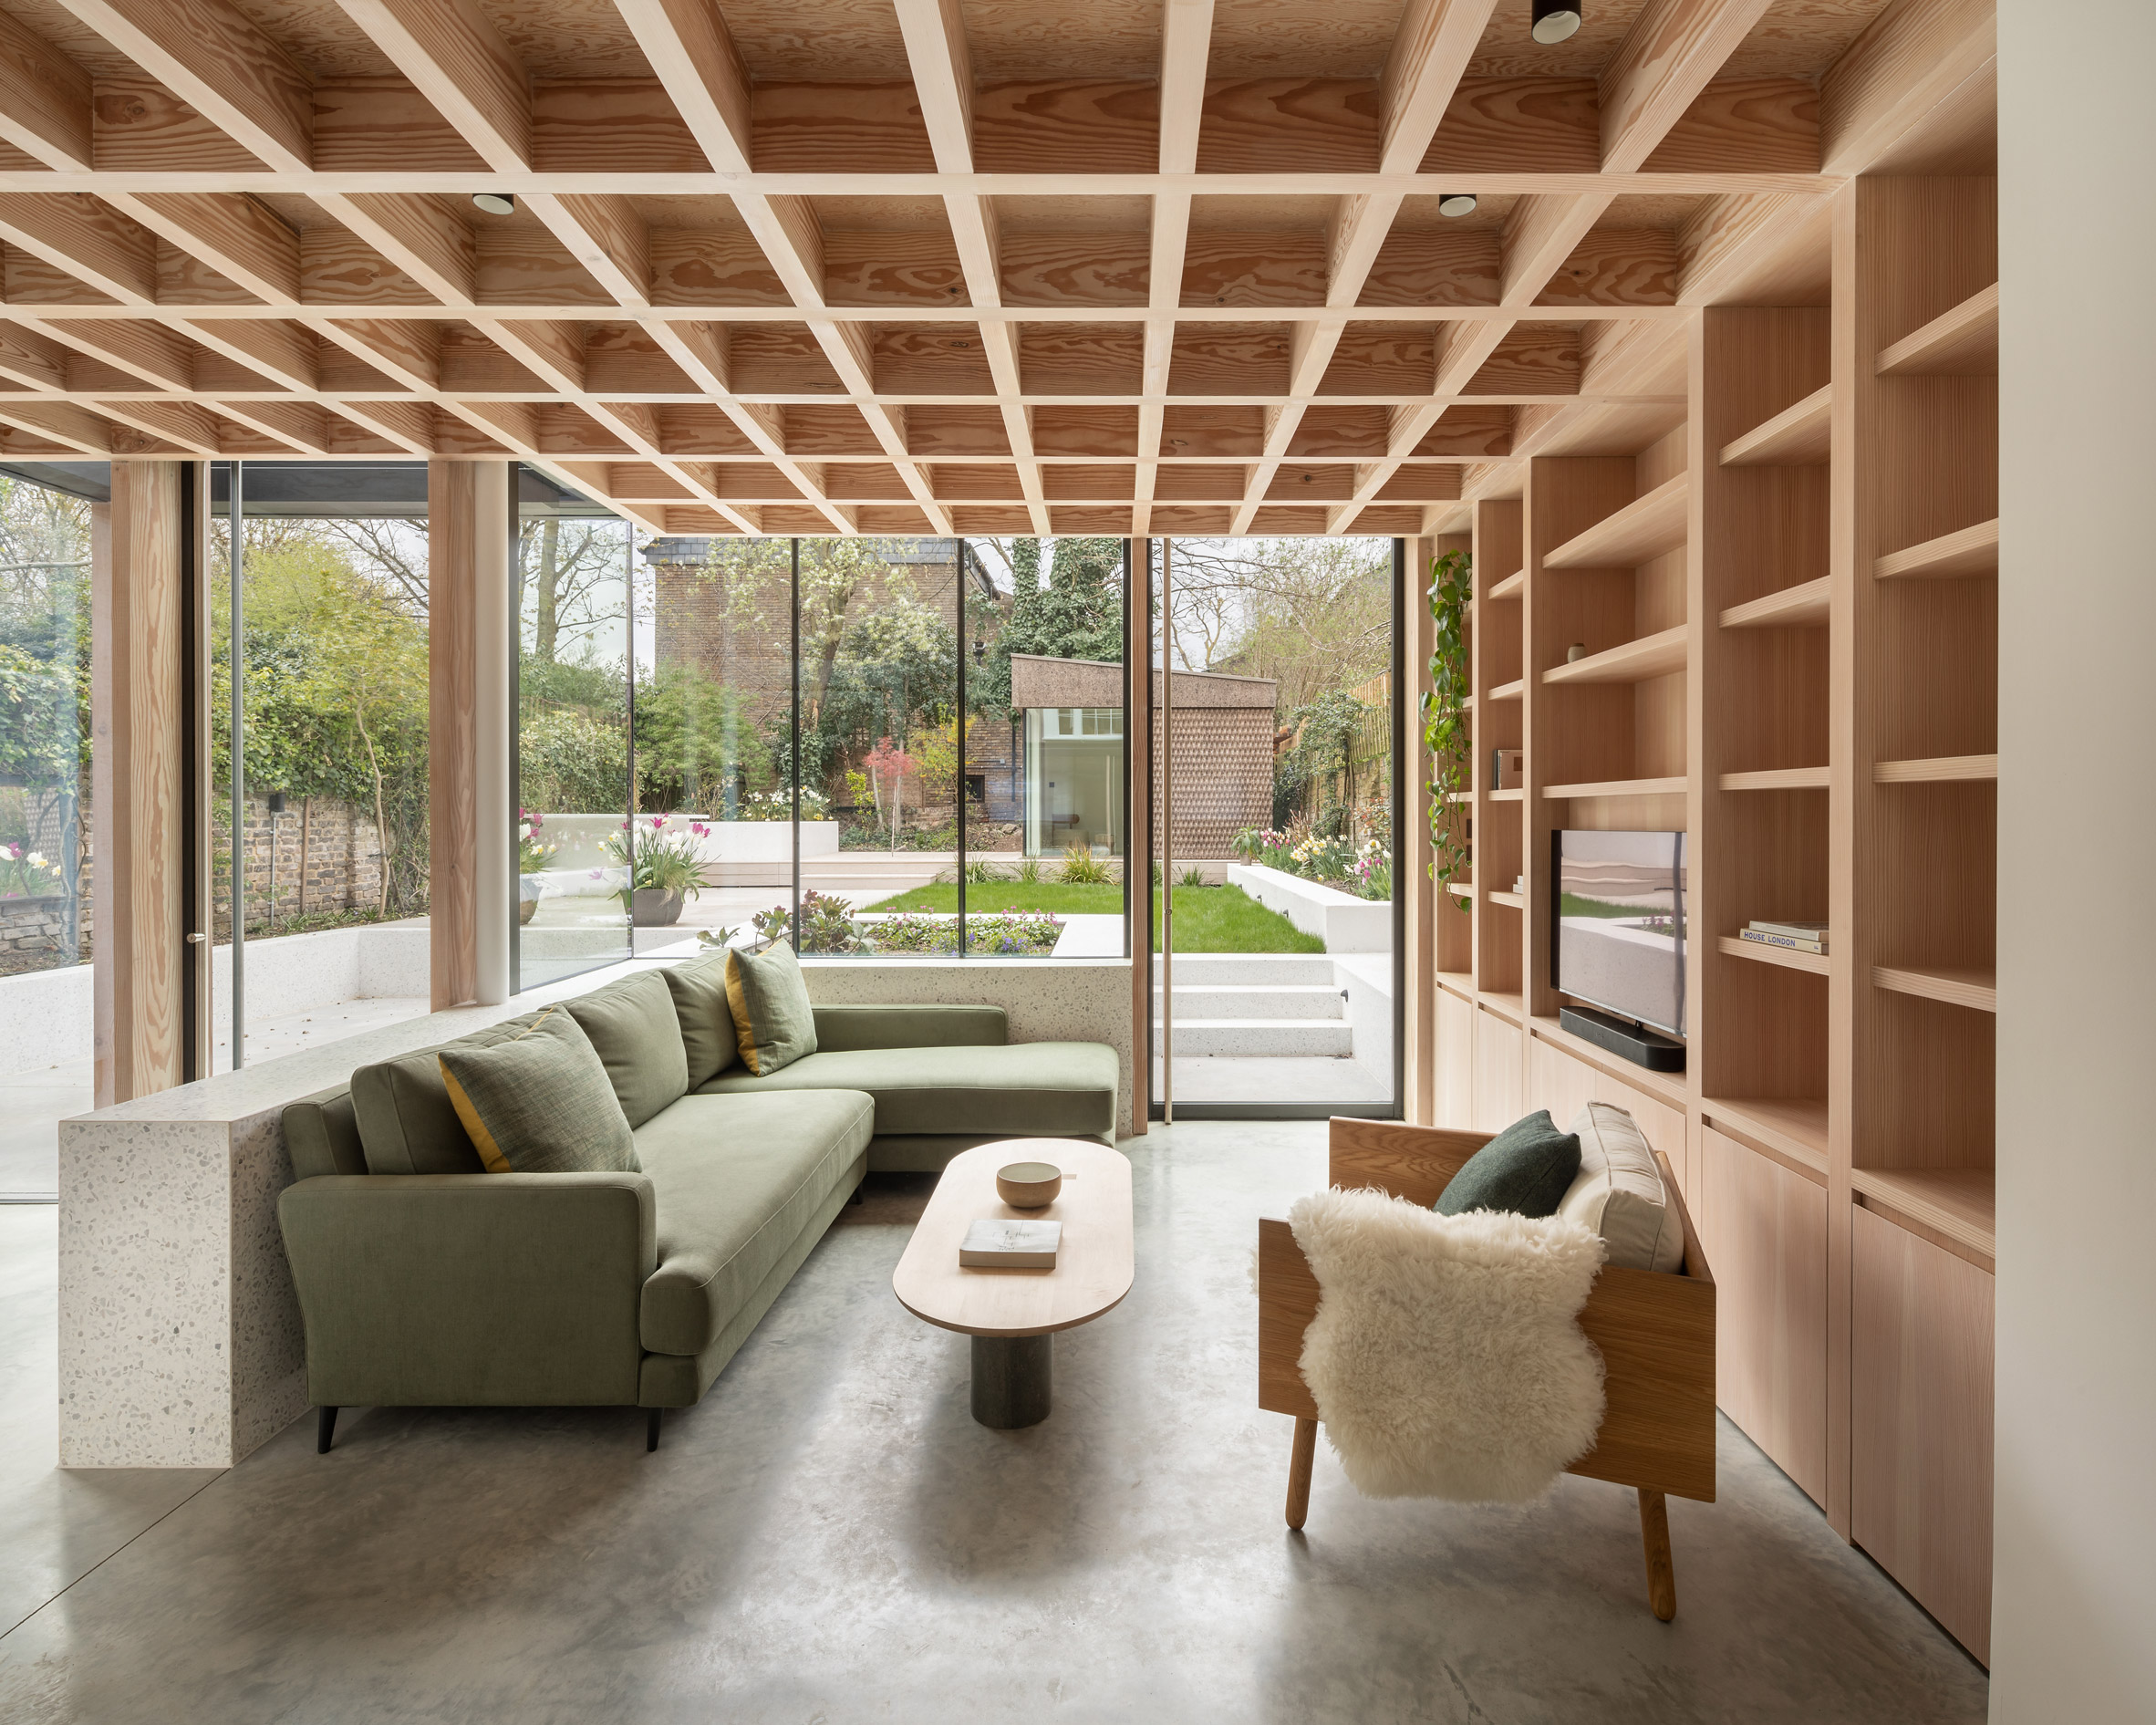 Interior of a London home extension with a wooden lattice ceiling